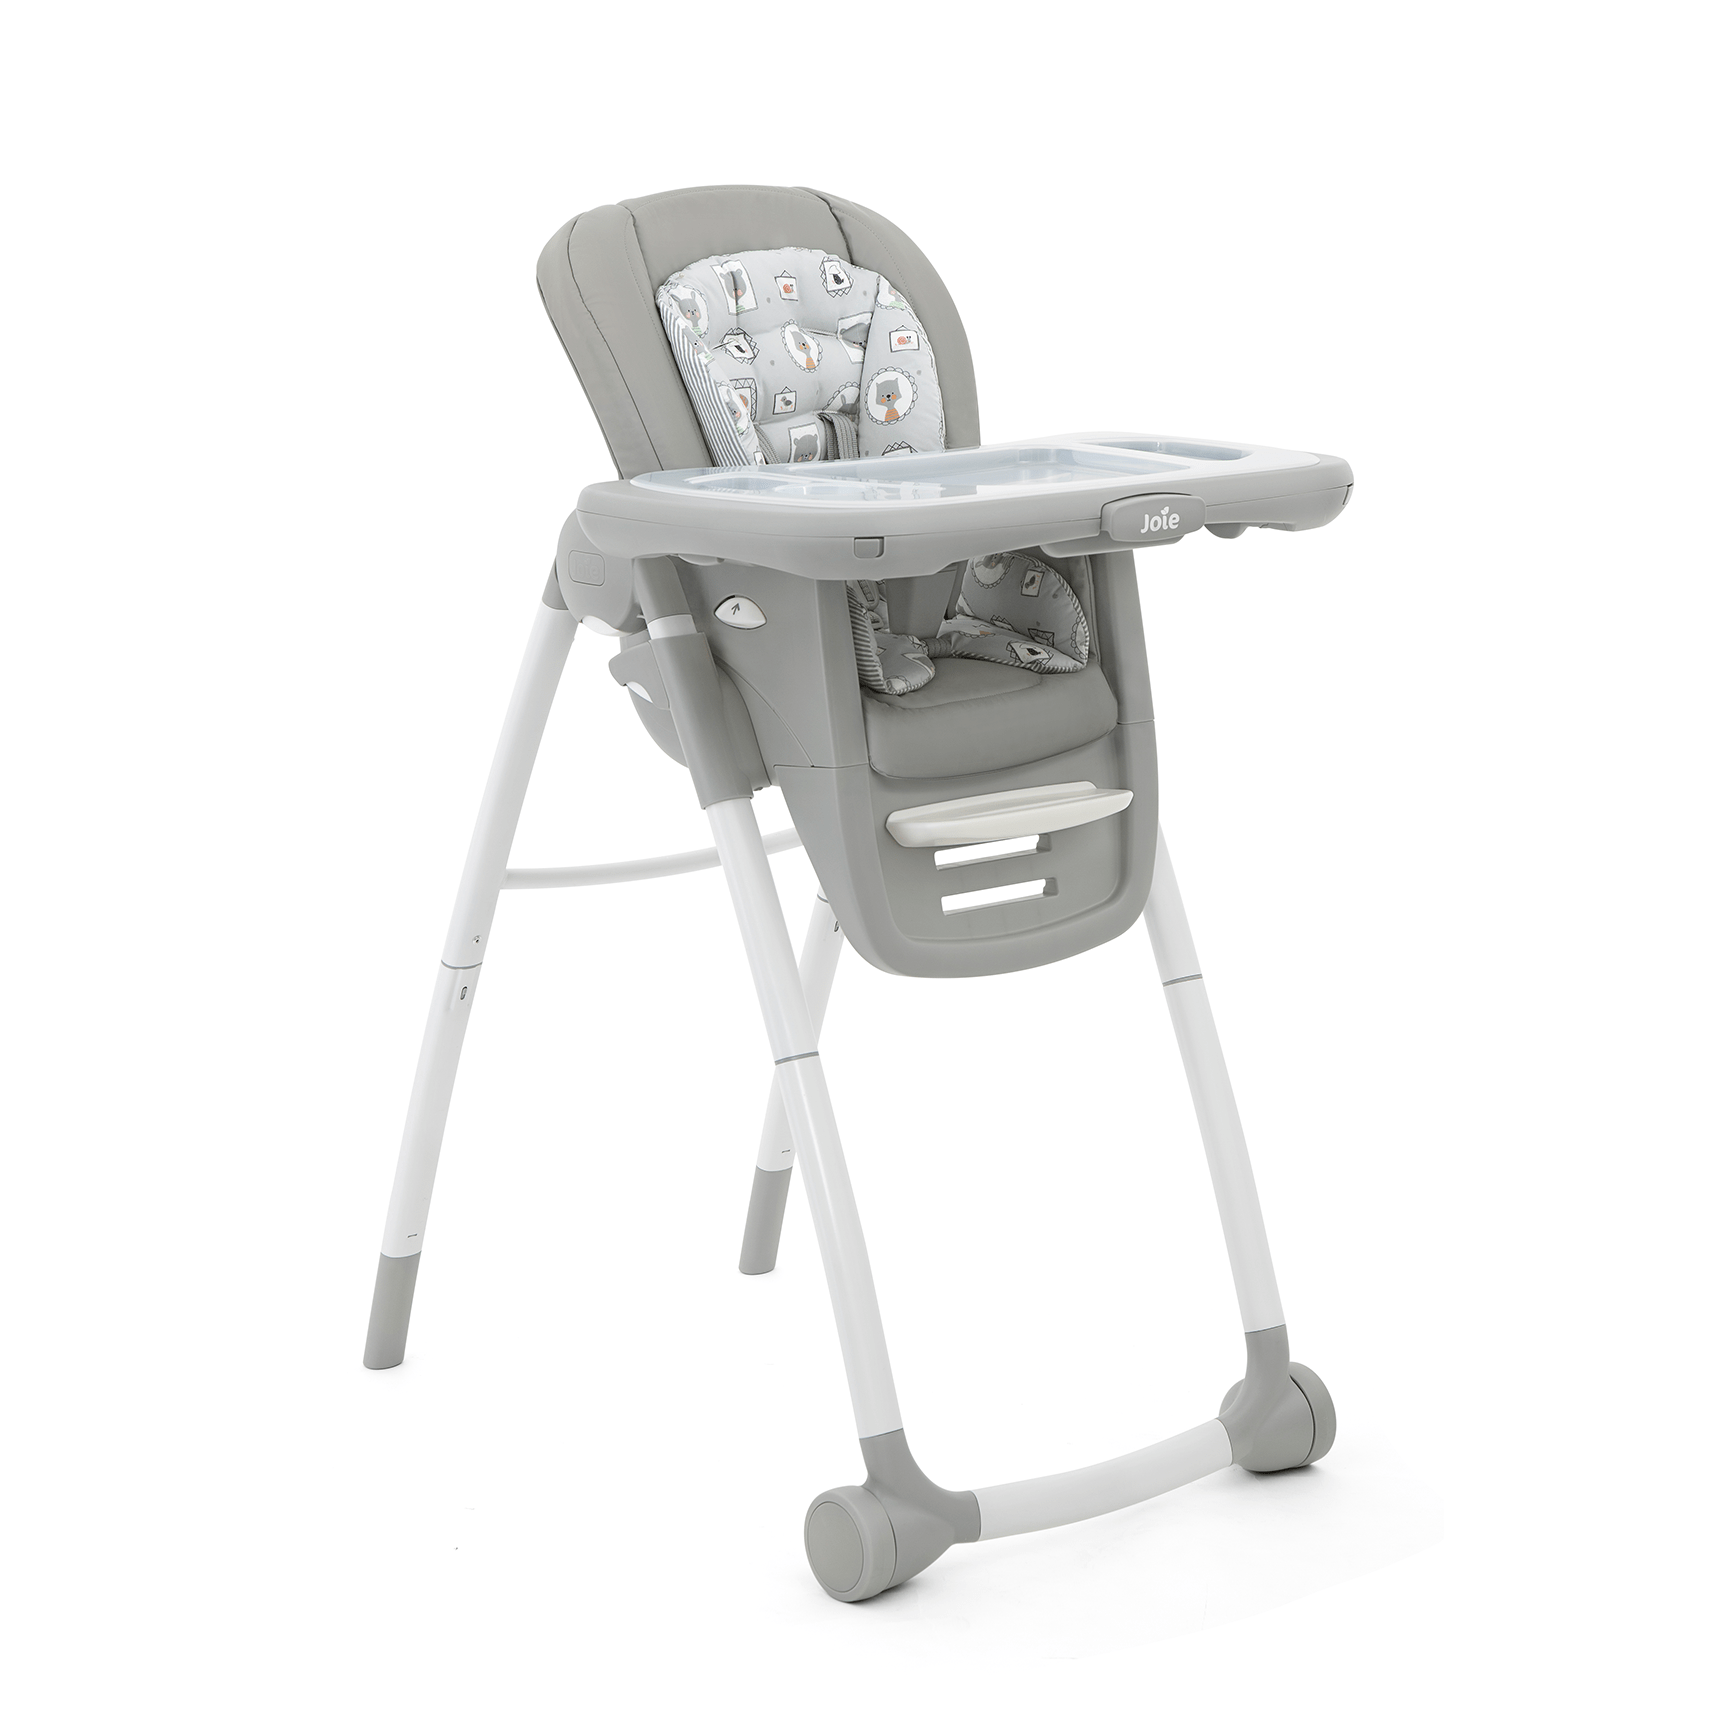 3in1 Mountains Joie Mimzy Highchair Spin in Geometric